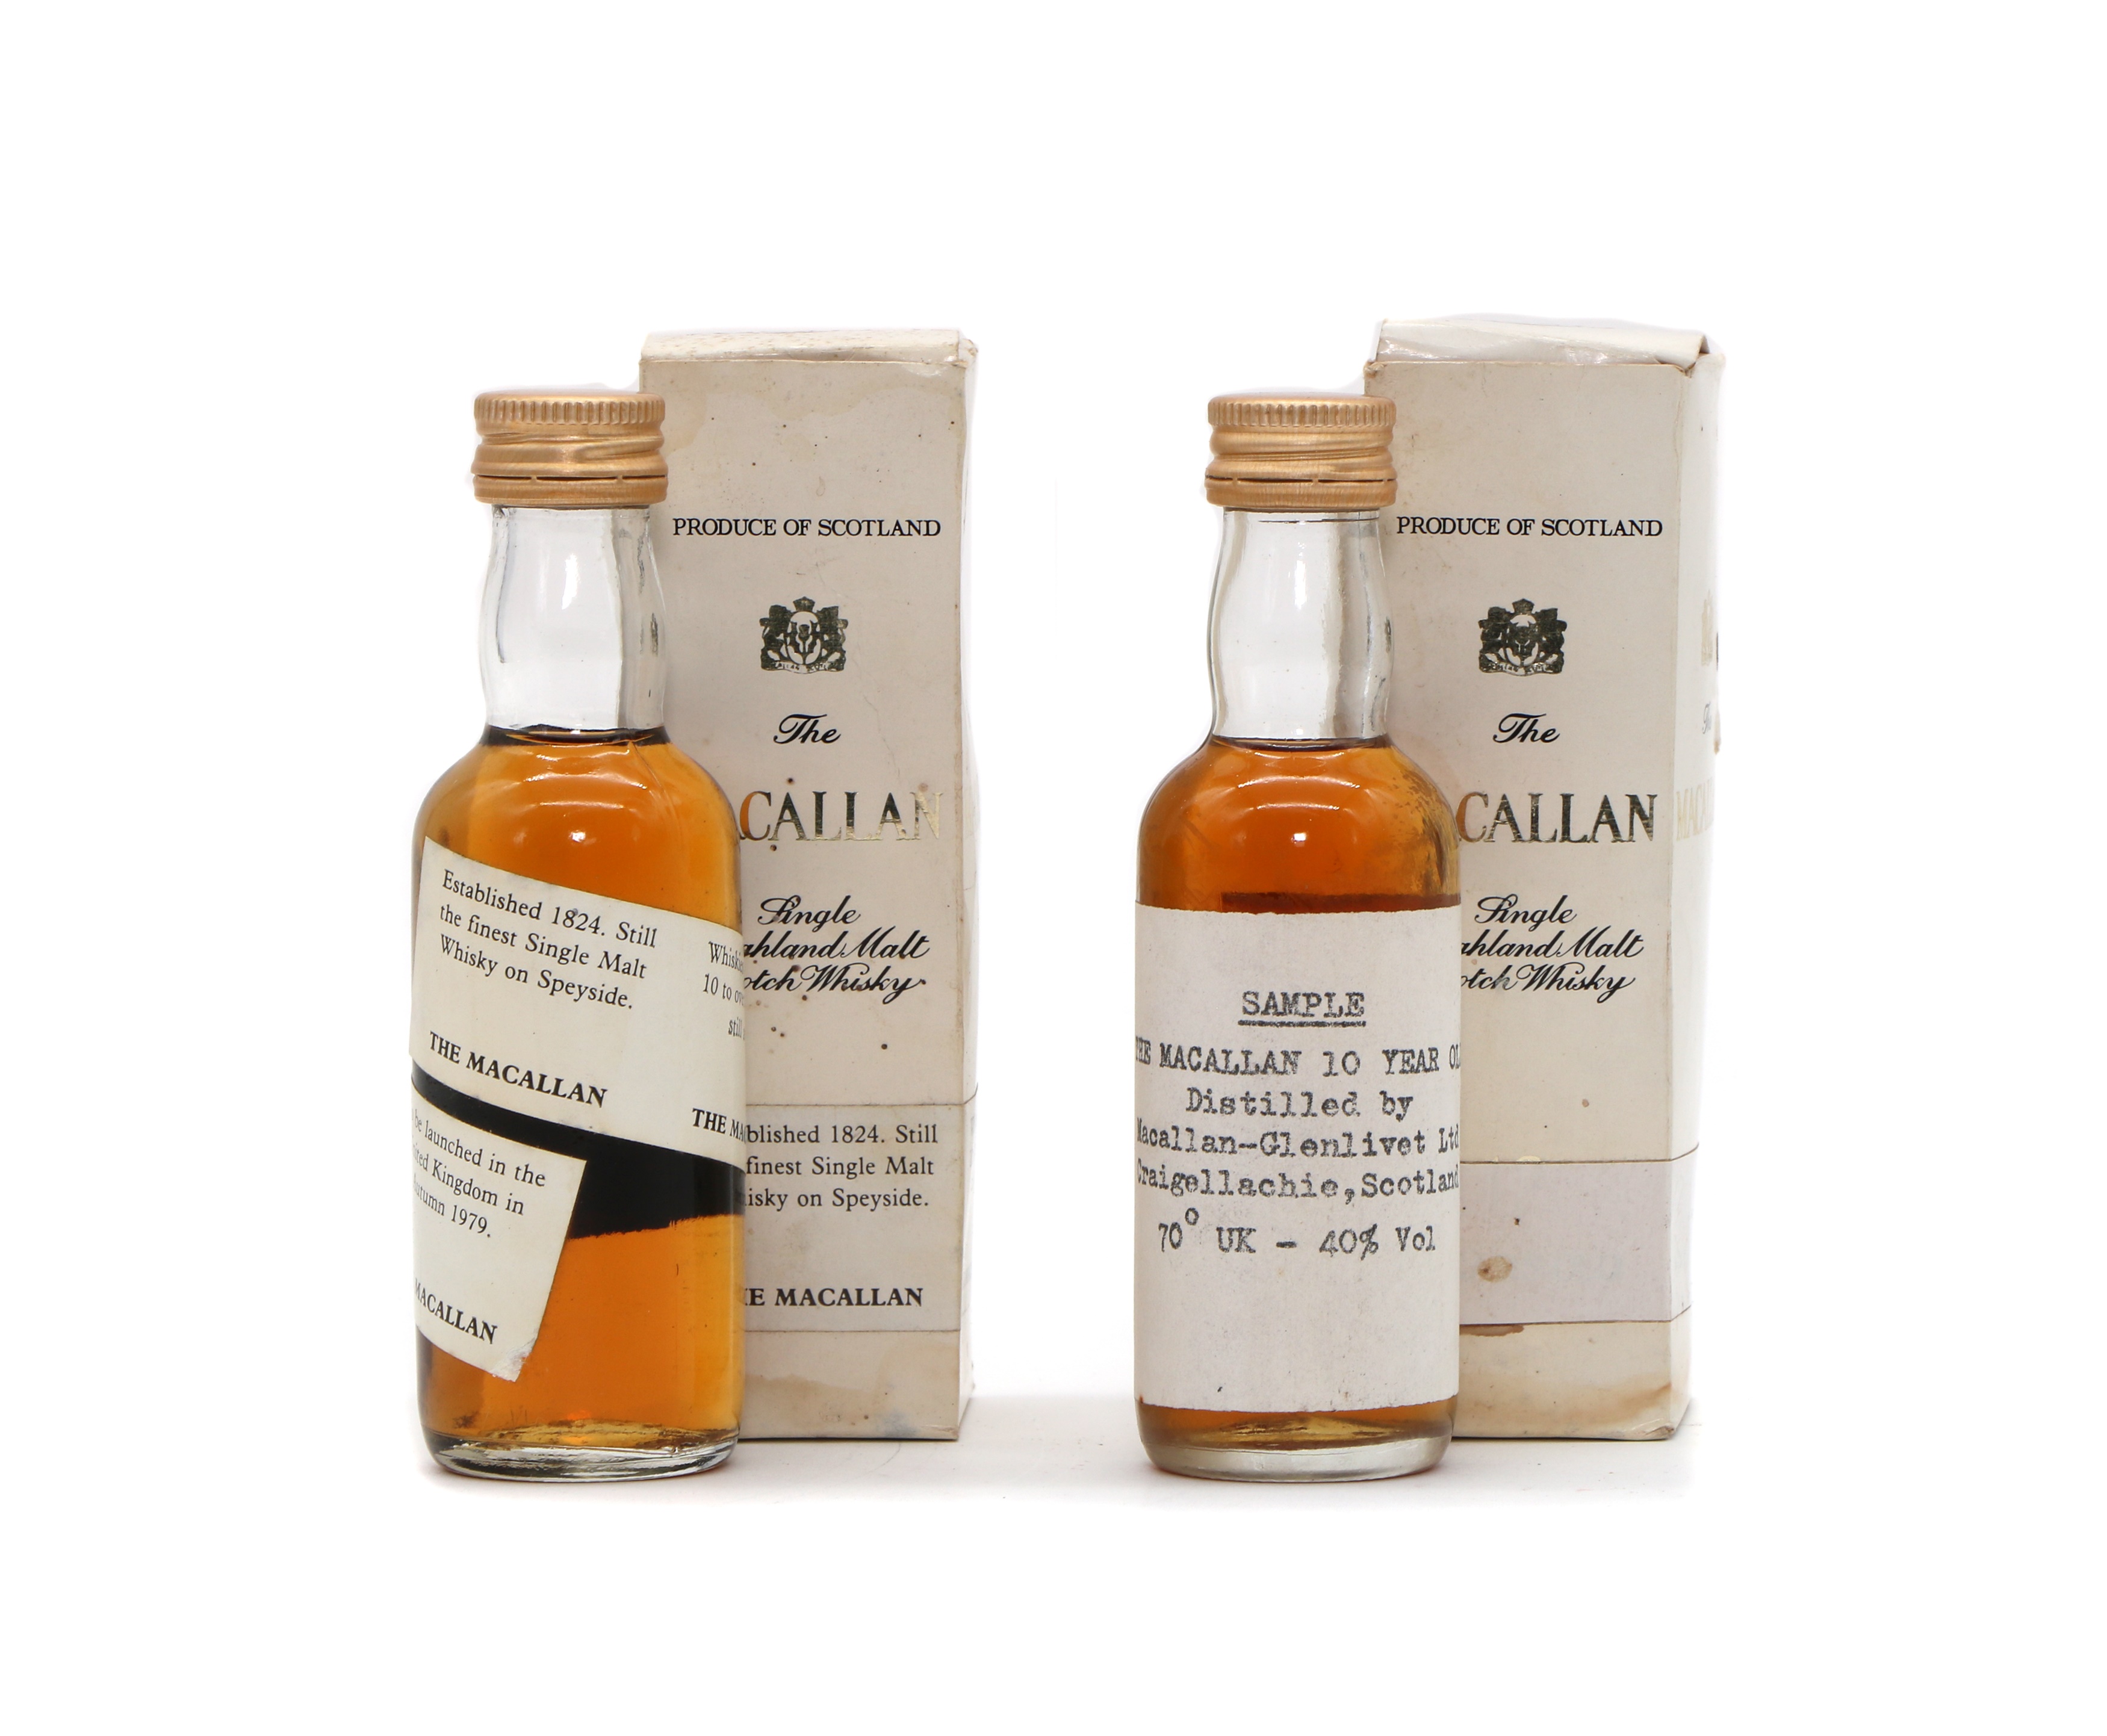 The Macallan spiral label miniature malt Scotch Whisky, 40% (1) and another miniature (£2,183)